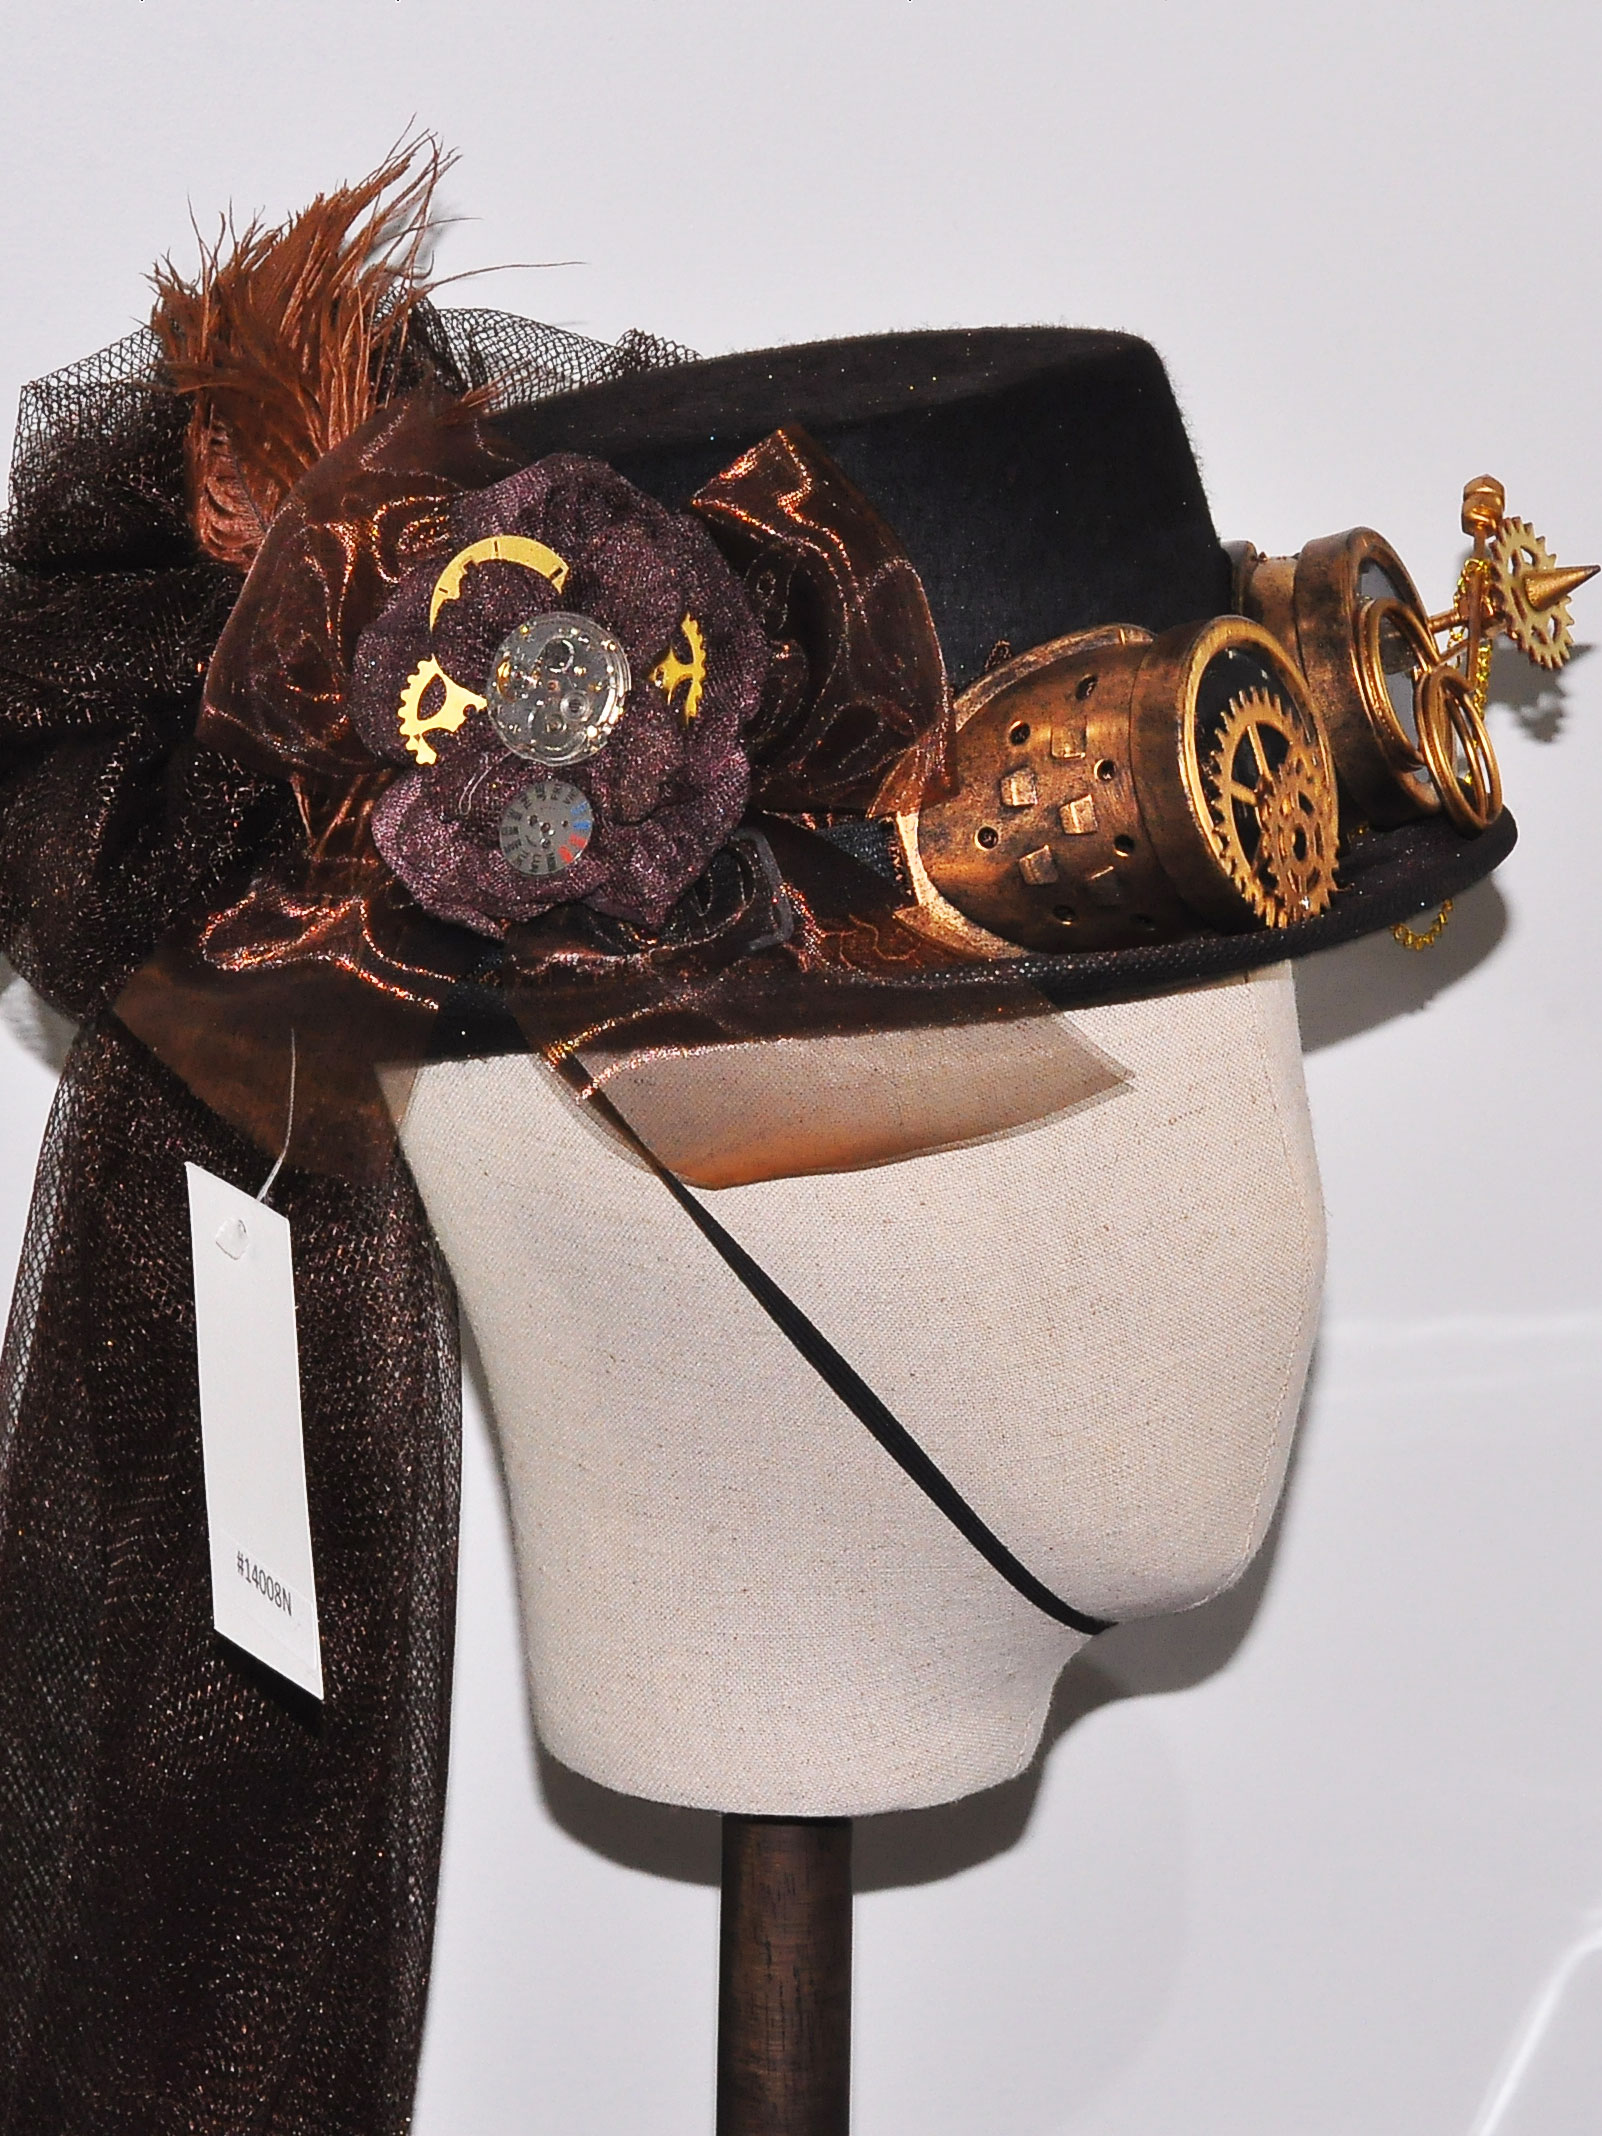 Beyond Masquerade Steampunk Headband Tiny Hat with Goggles and Feathers